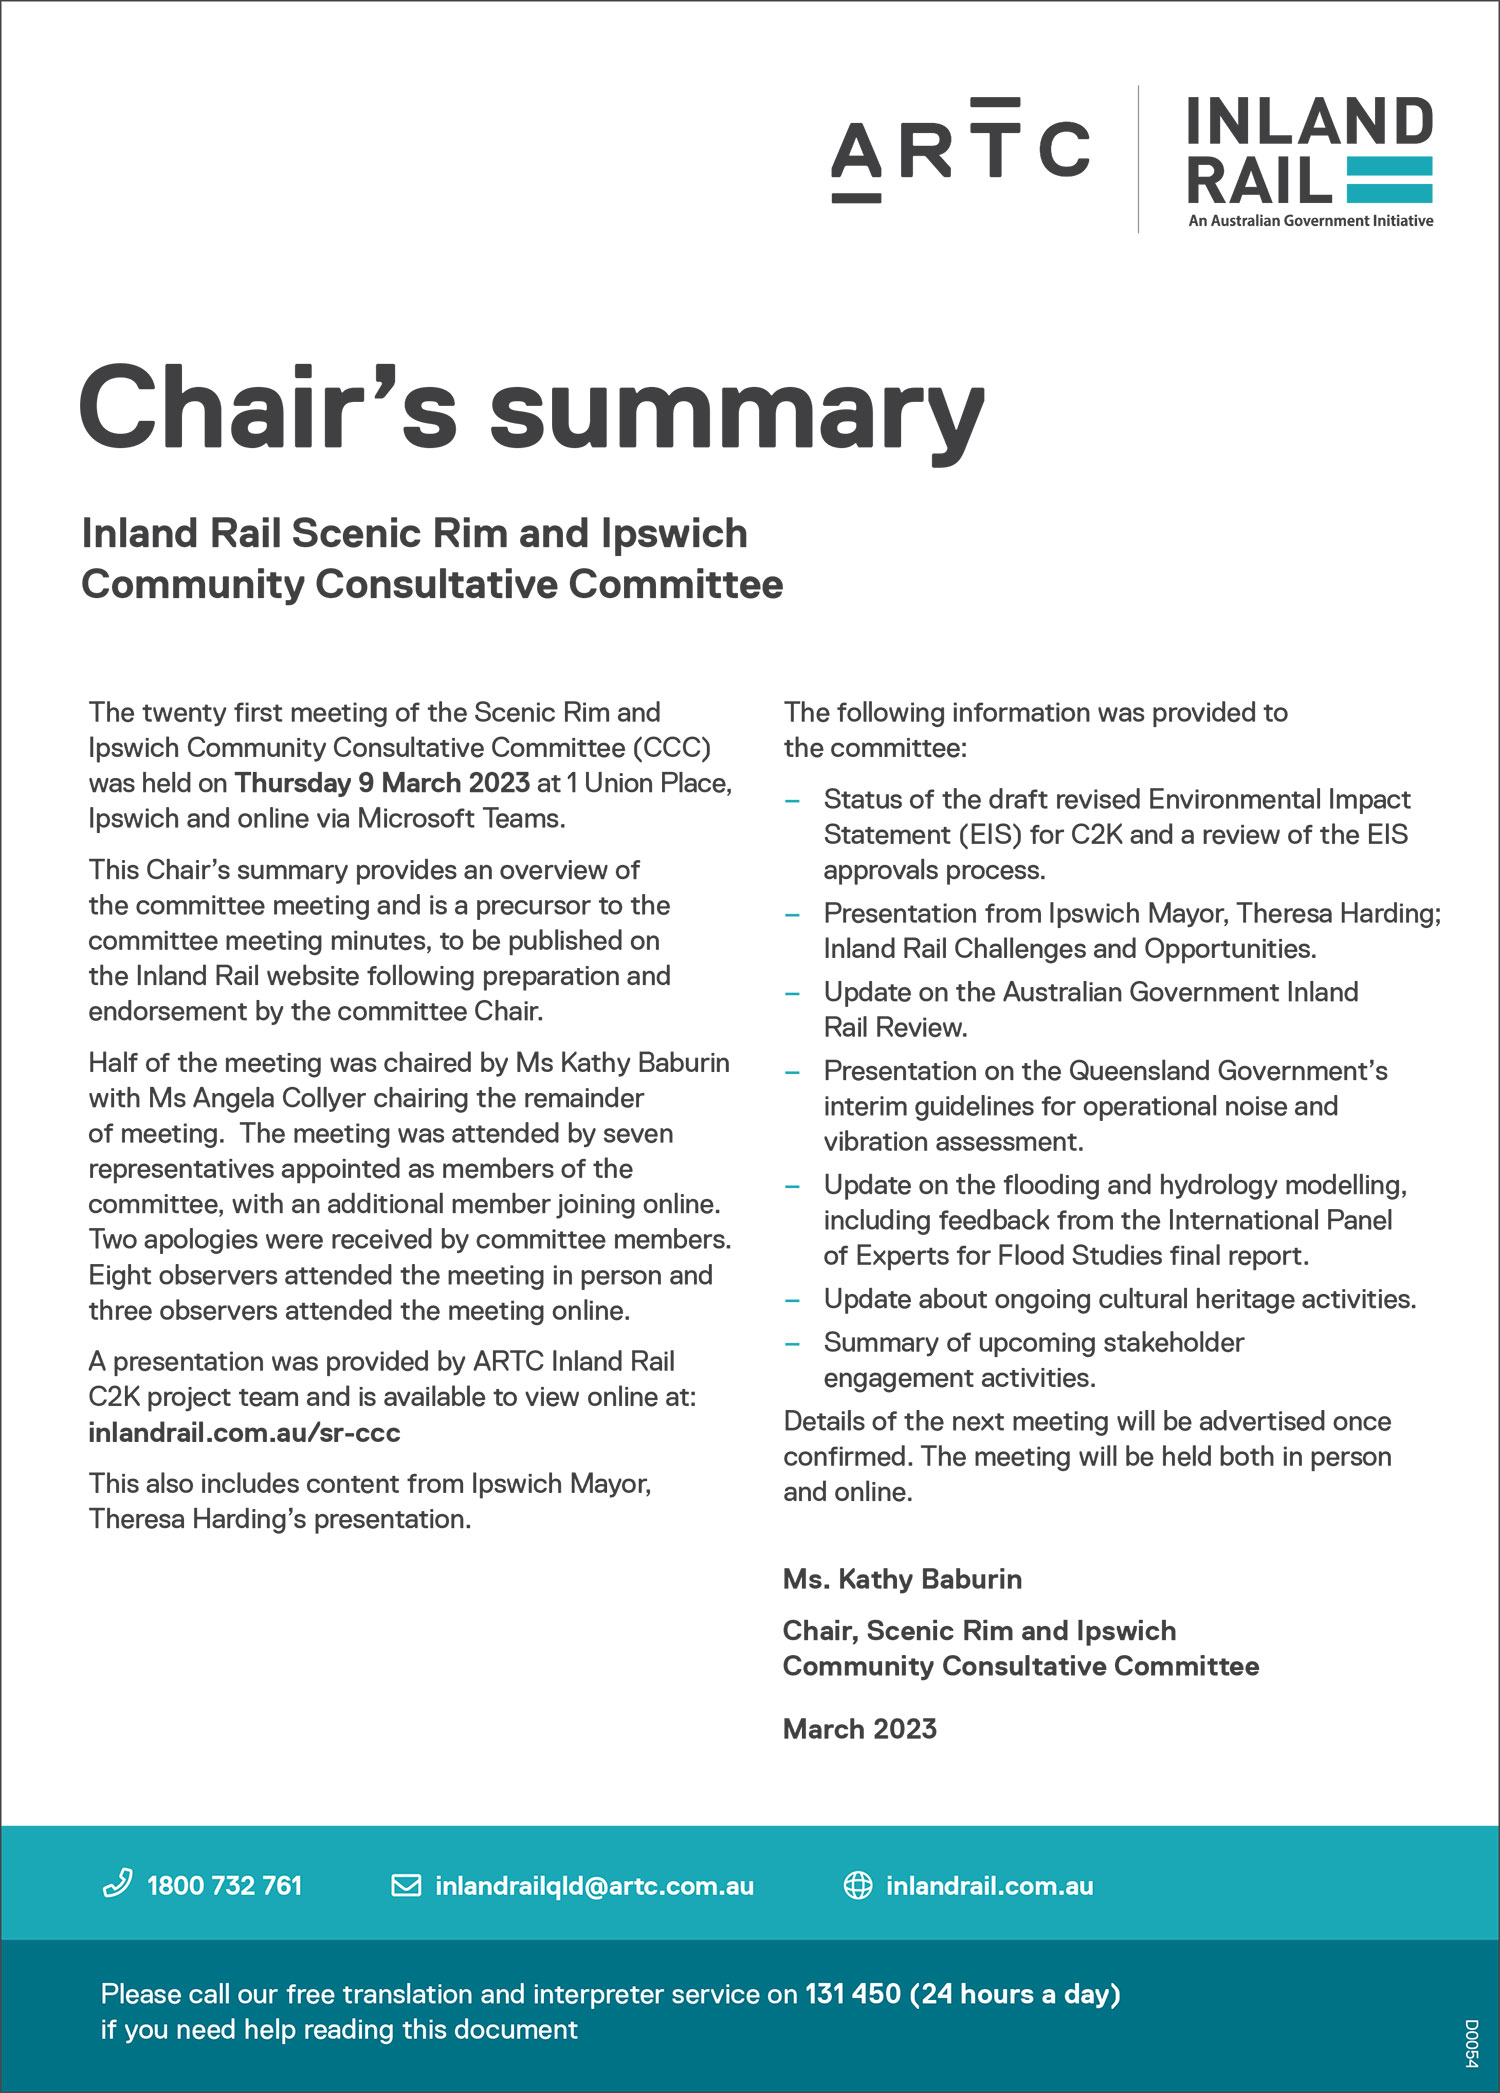 Thumbnail of Scenic Rim and Ipswich CCC Chair's summary document for 9 April 2023